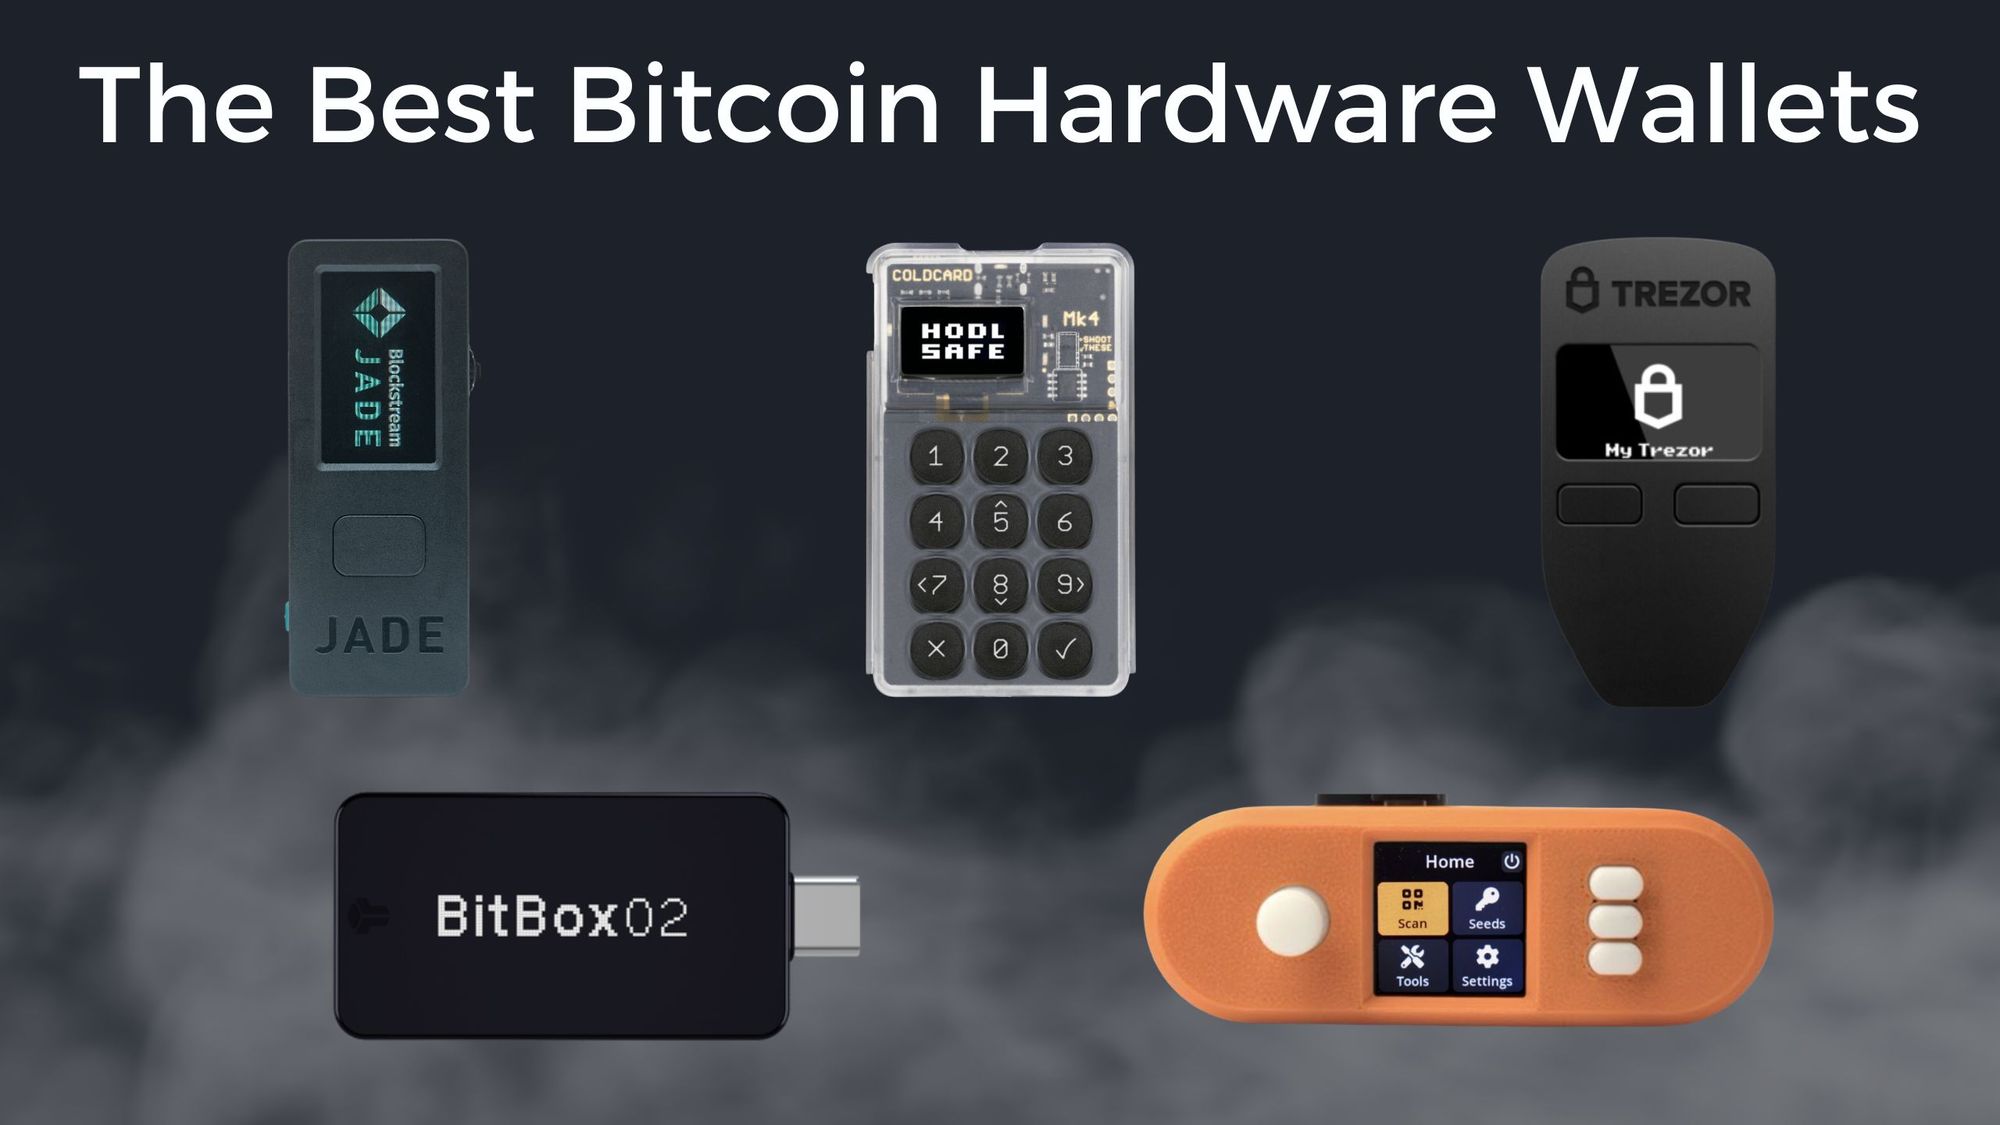 An easy guide to use Blockstream's Jade Hardware Wallet – Bitcoin Guides